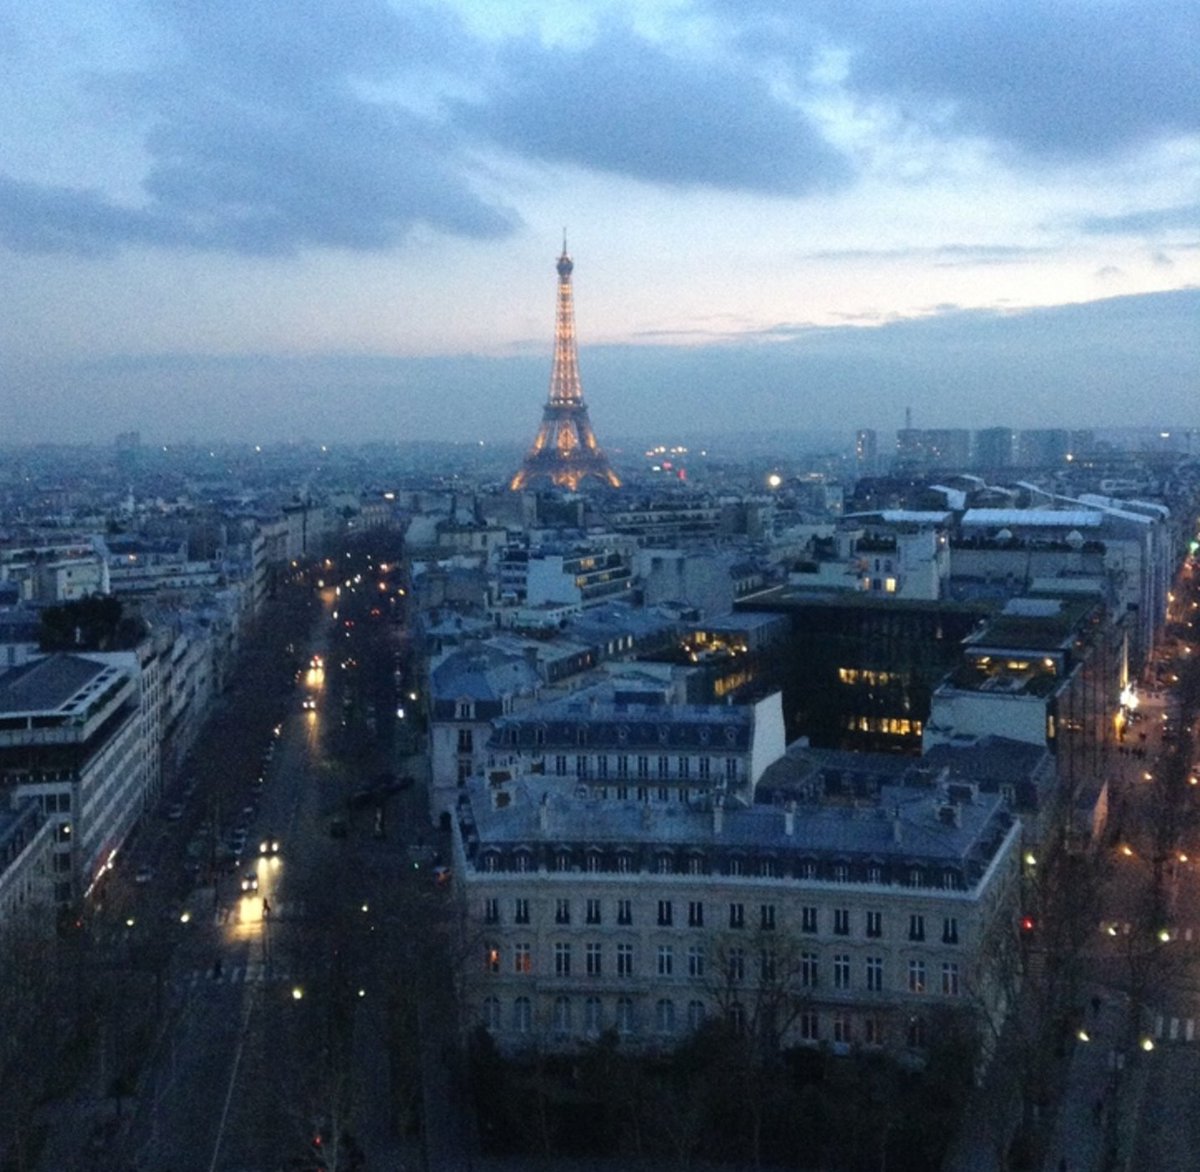 A rather pretty picture of Paris.. https://t.co/eyMyBu5Dvd https://t.co/eWxQKLeOkF